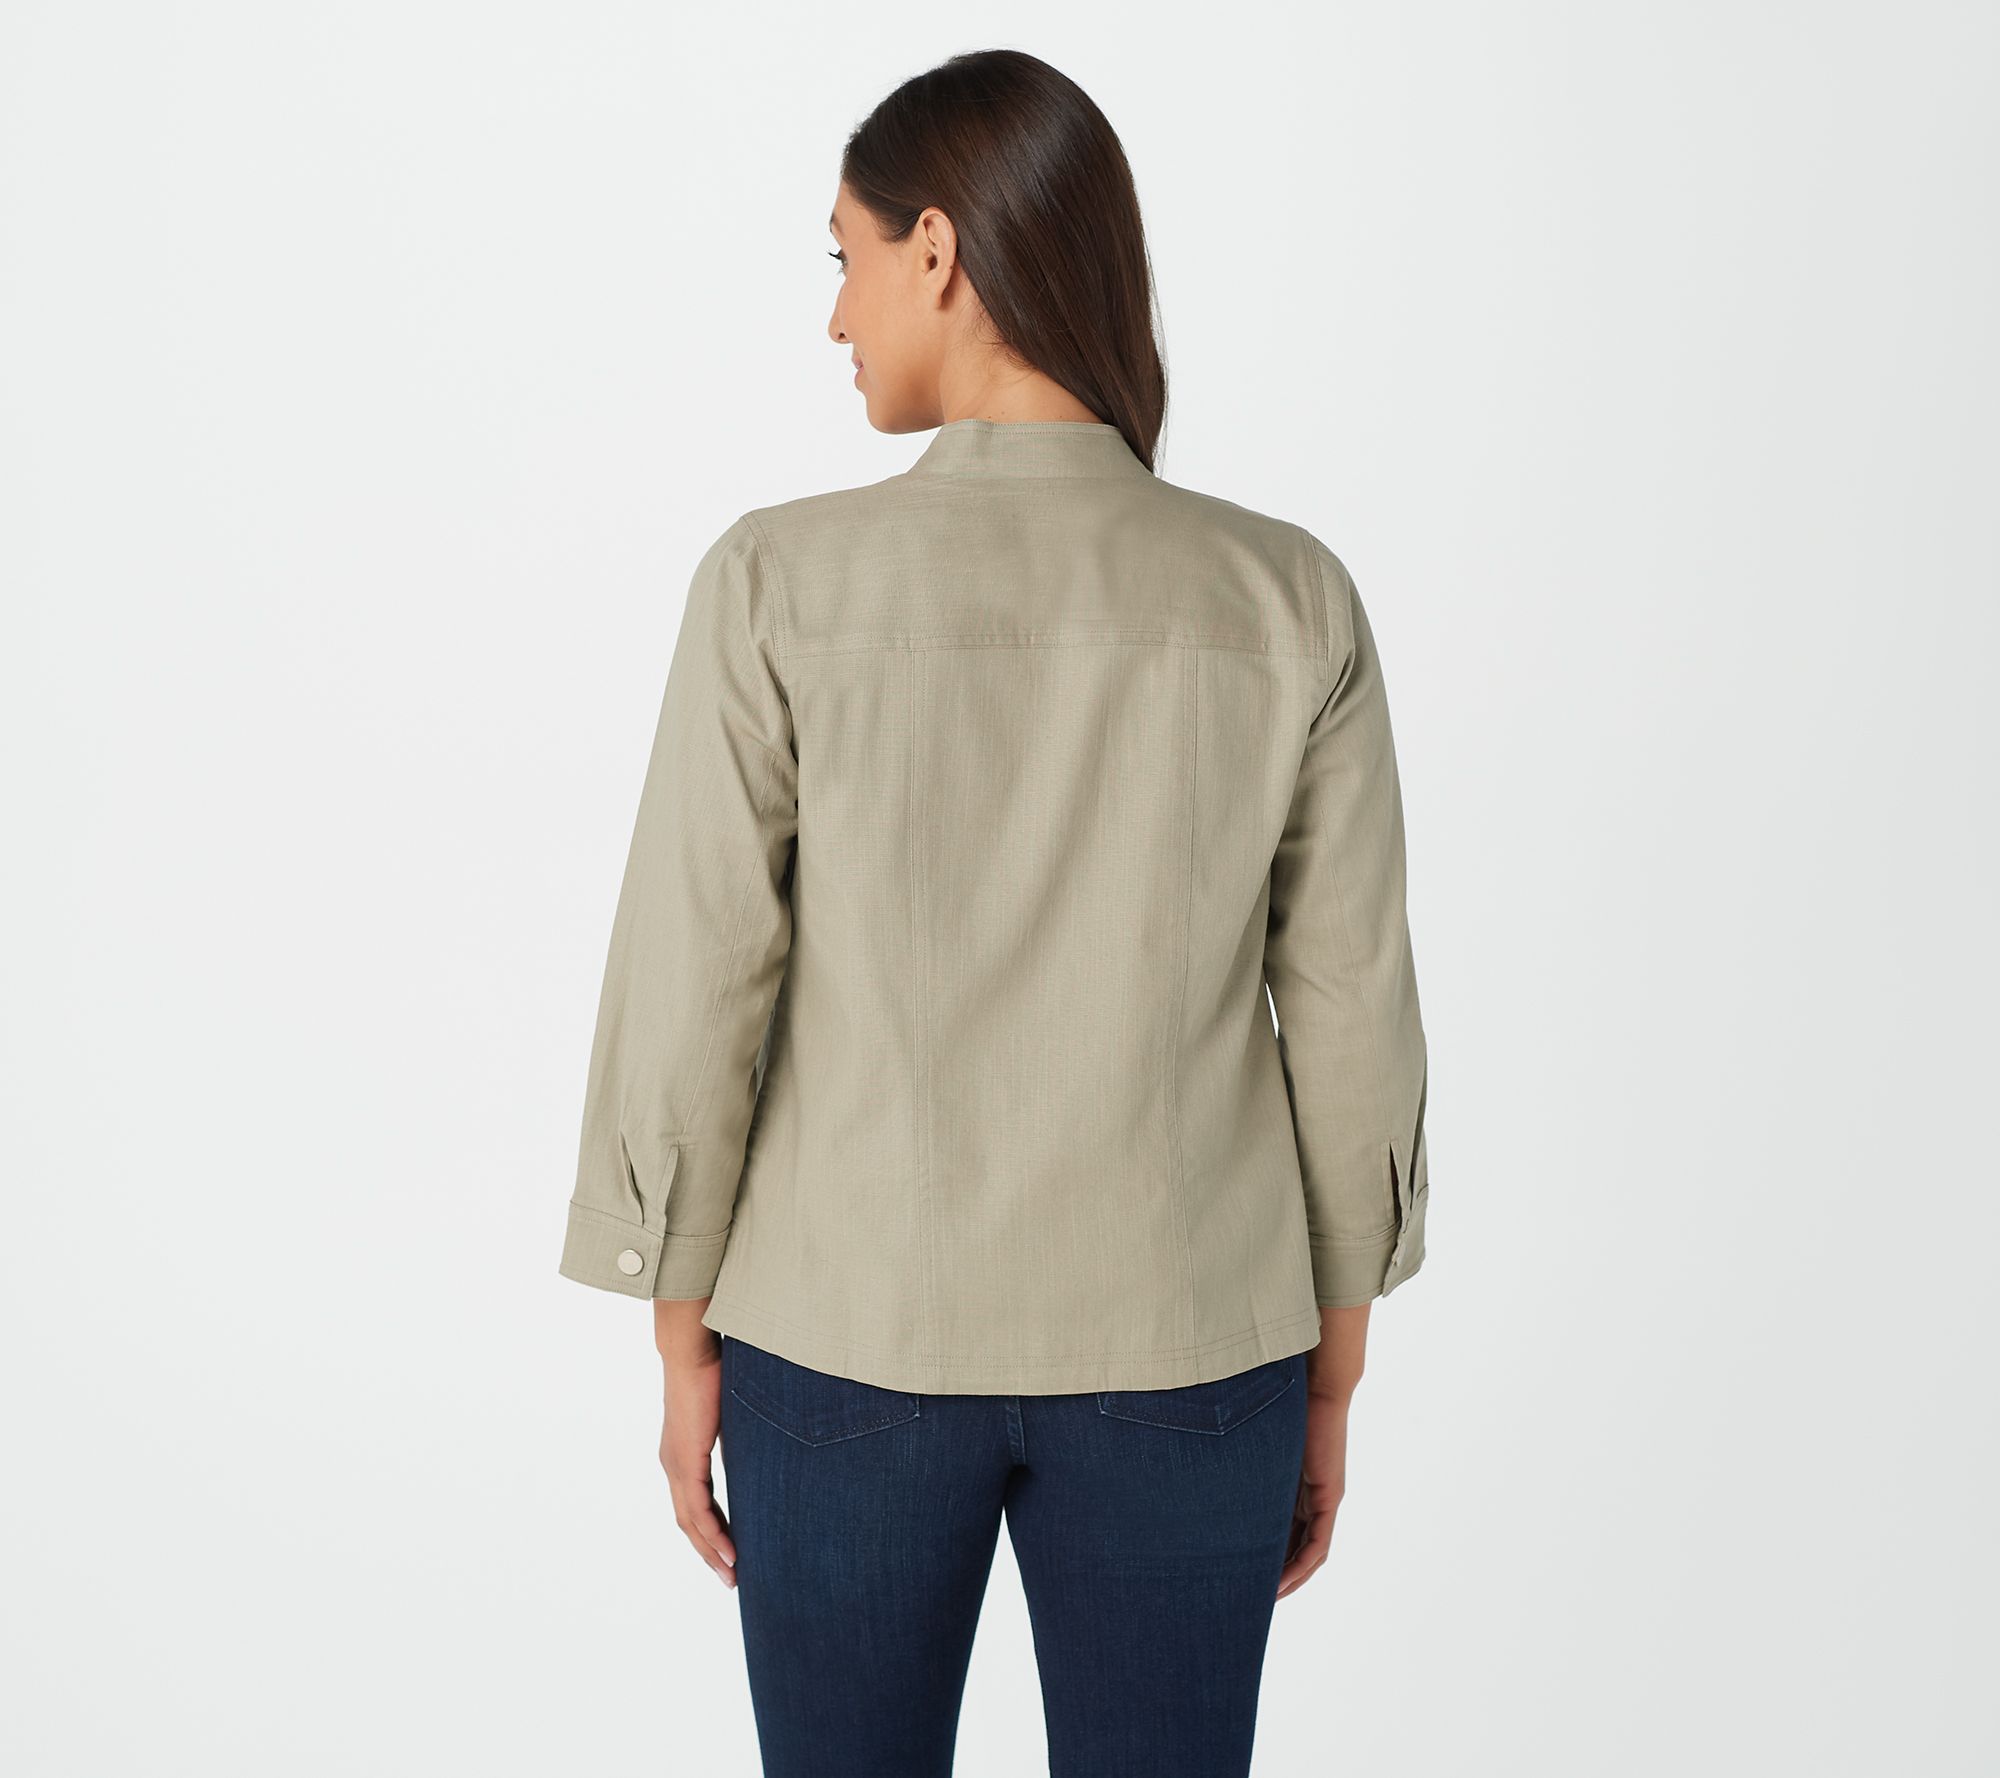 Belle by Kim Gravel Jacket with Printed Inside - QVC.com